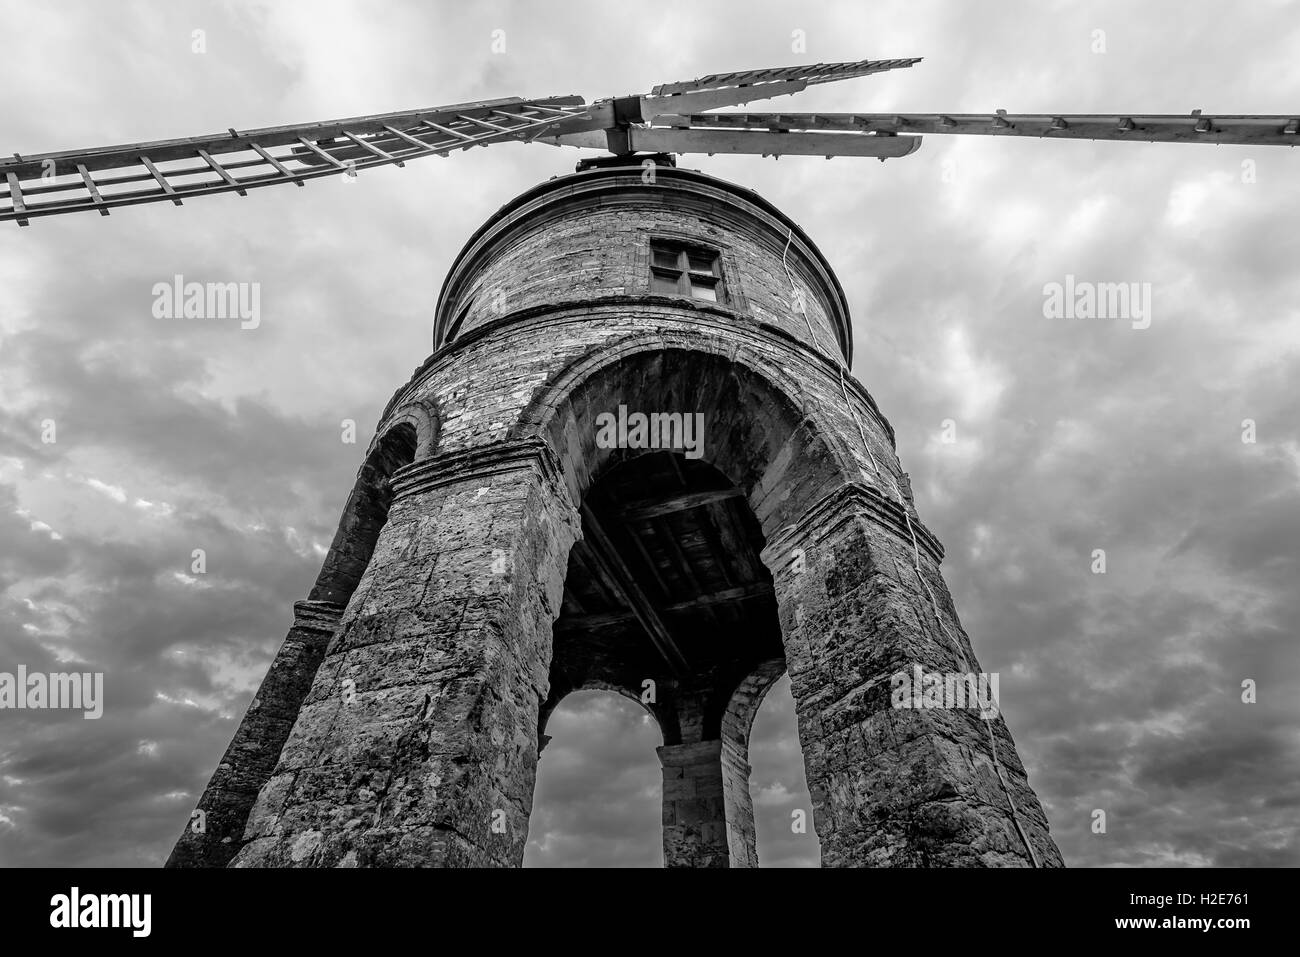 Chesterton Windmill from below in Black & White standing tall & proud in stormy skies Stock Photo